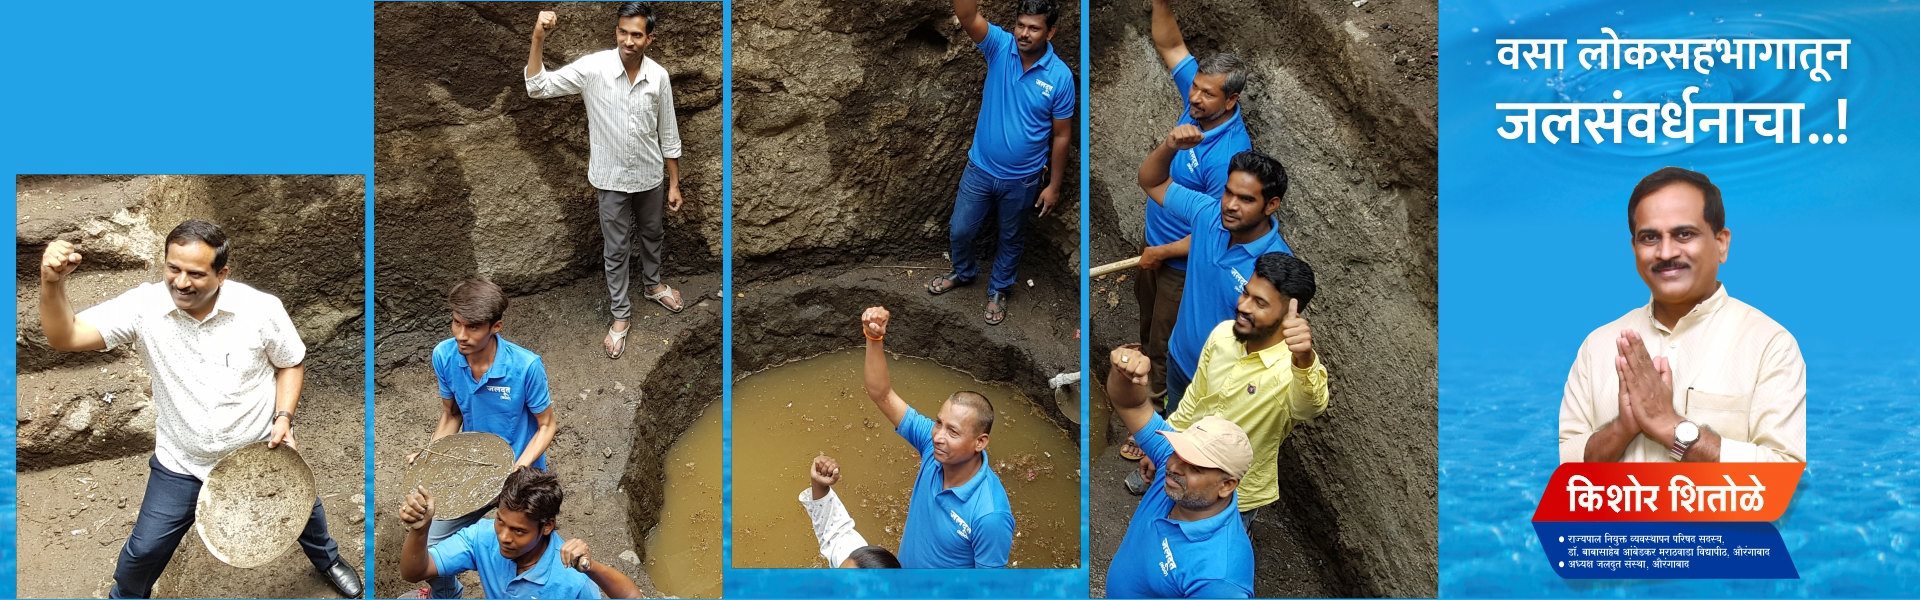 jaldoot-organization-head-kishore-shitole-and-jaldoot-team-cleaning-water-body-water-conservation-water-harvesting